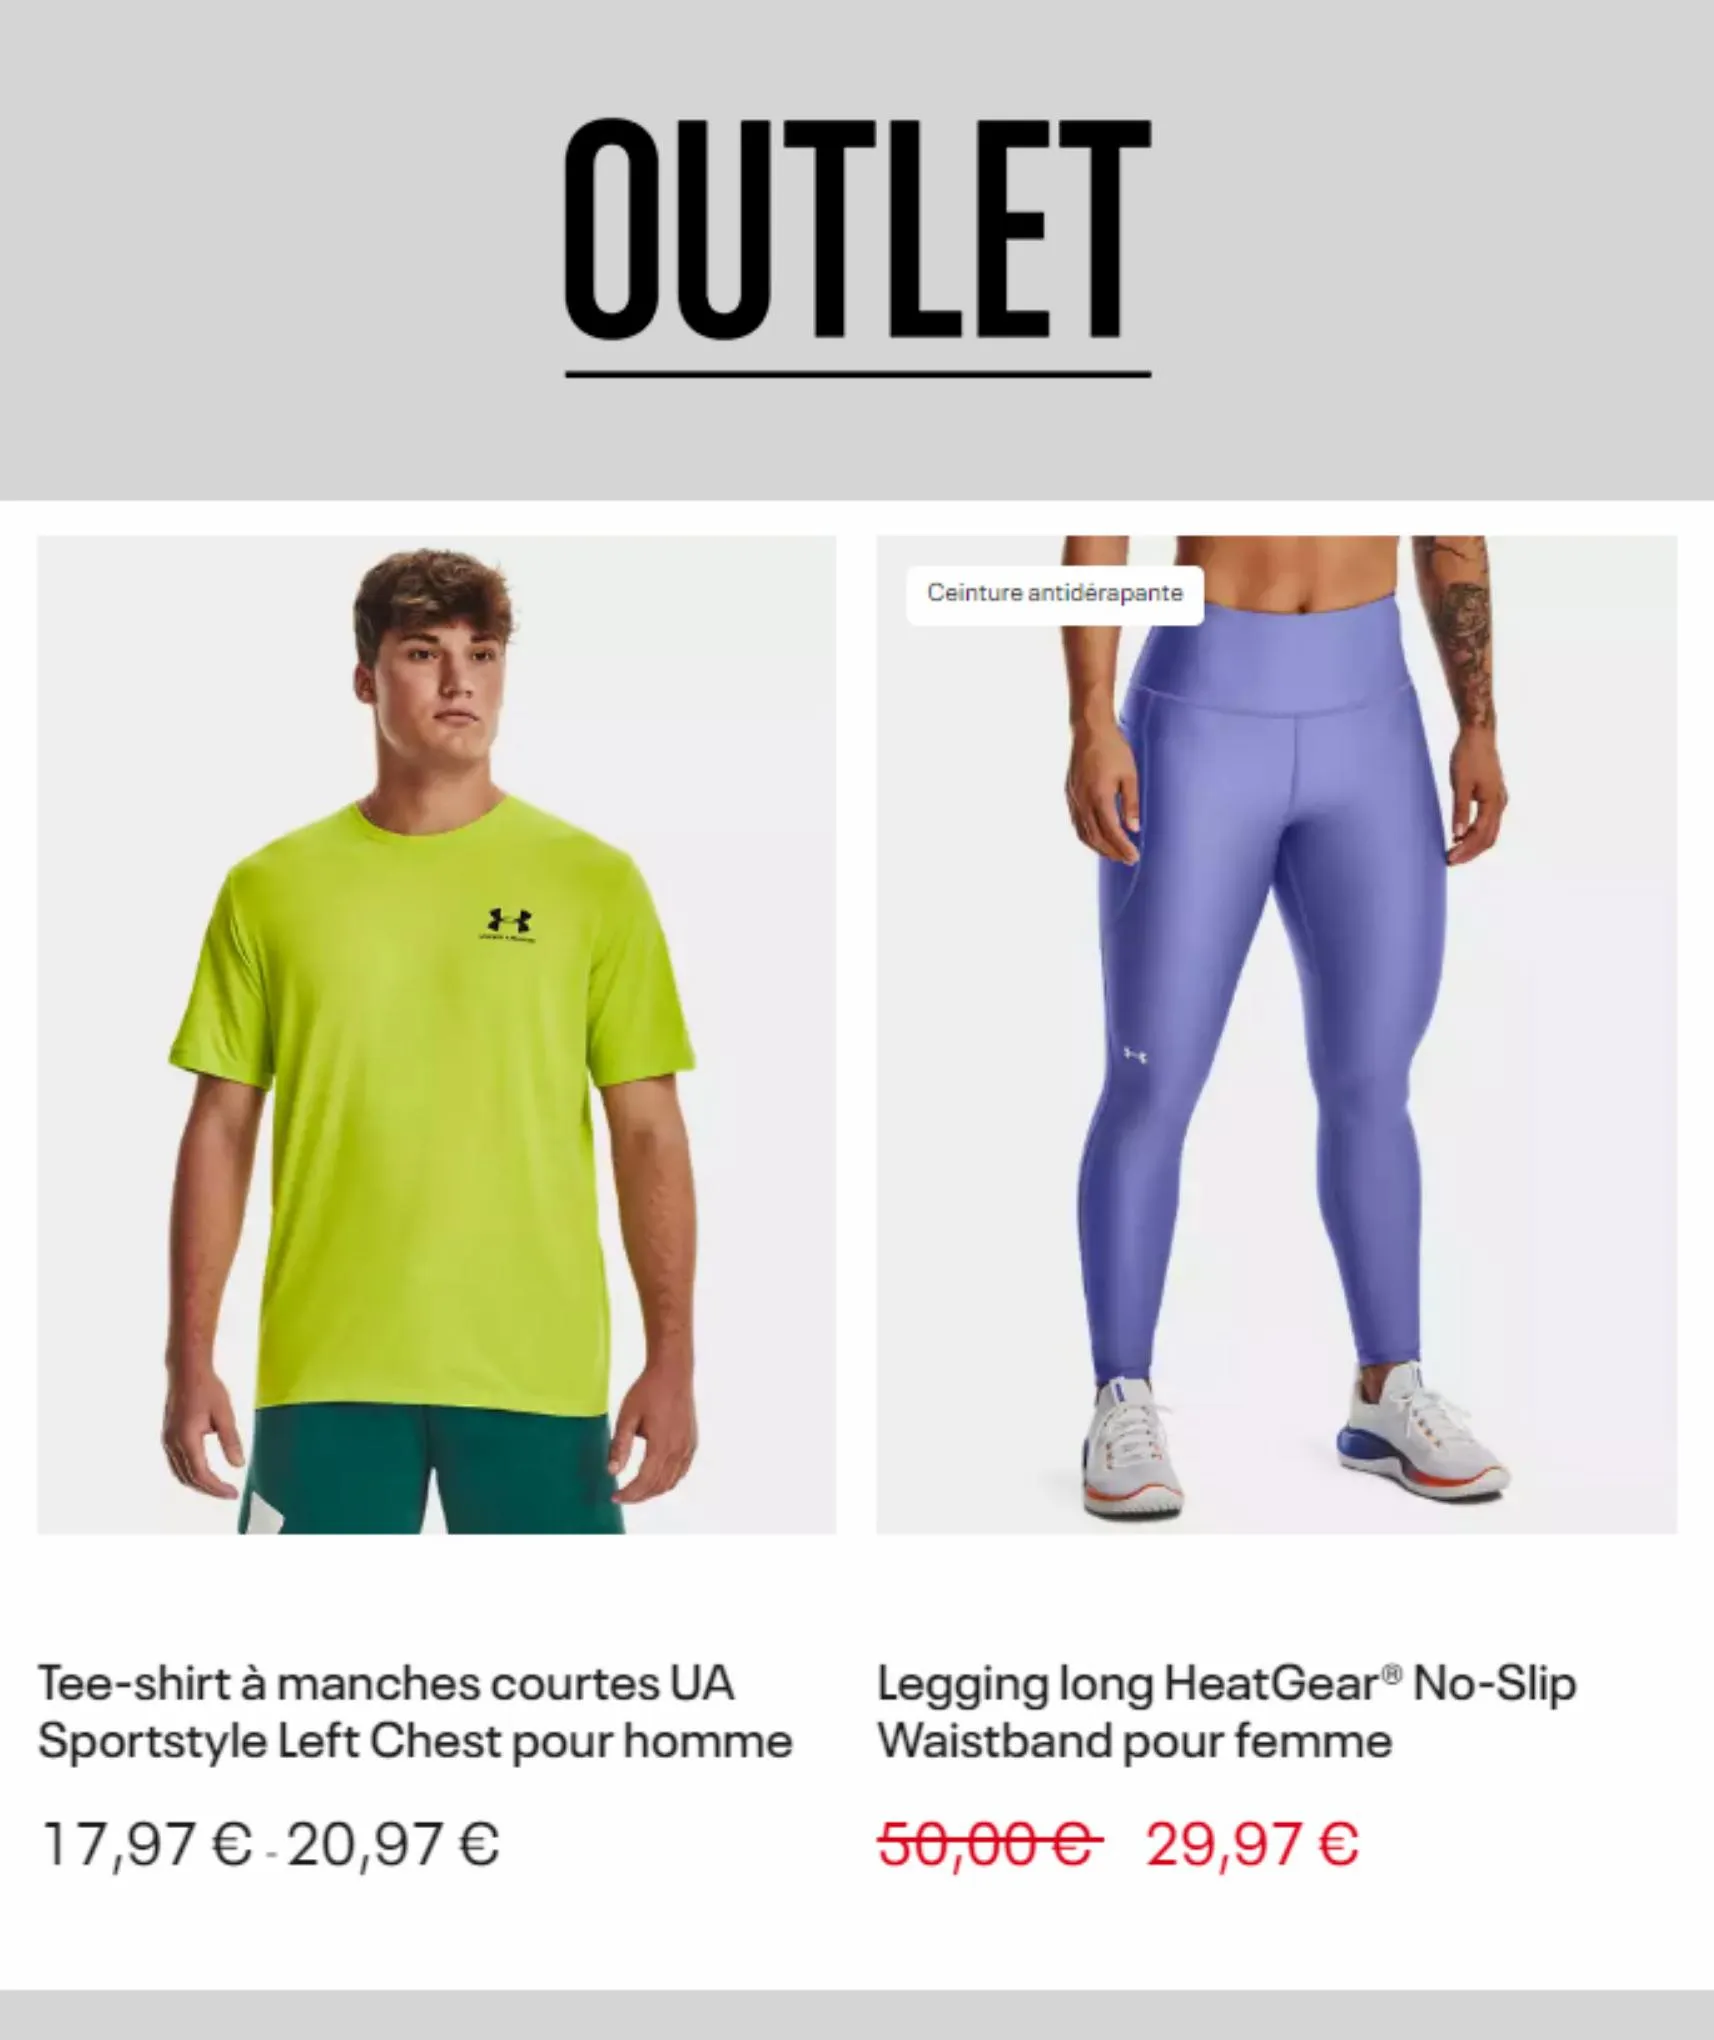 Catalogue Outlet Under Armour, page 00003